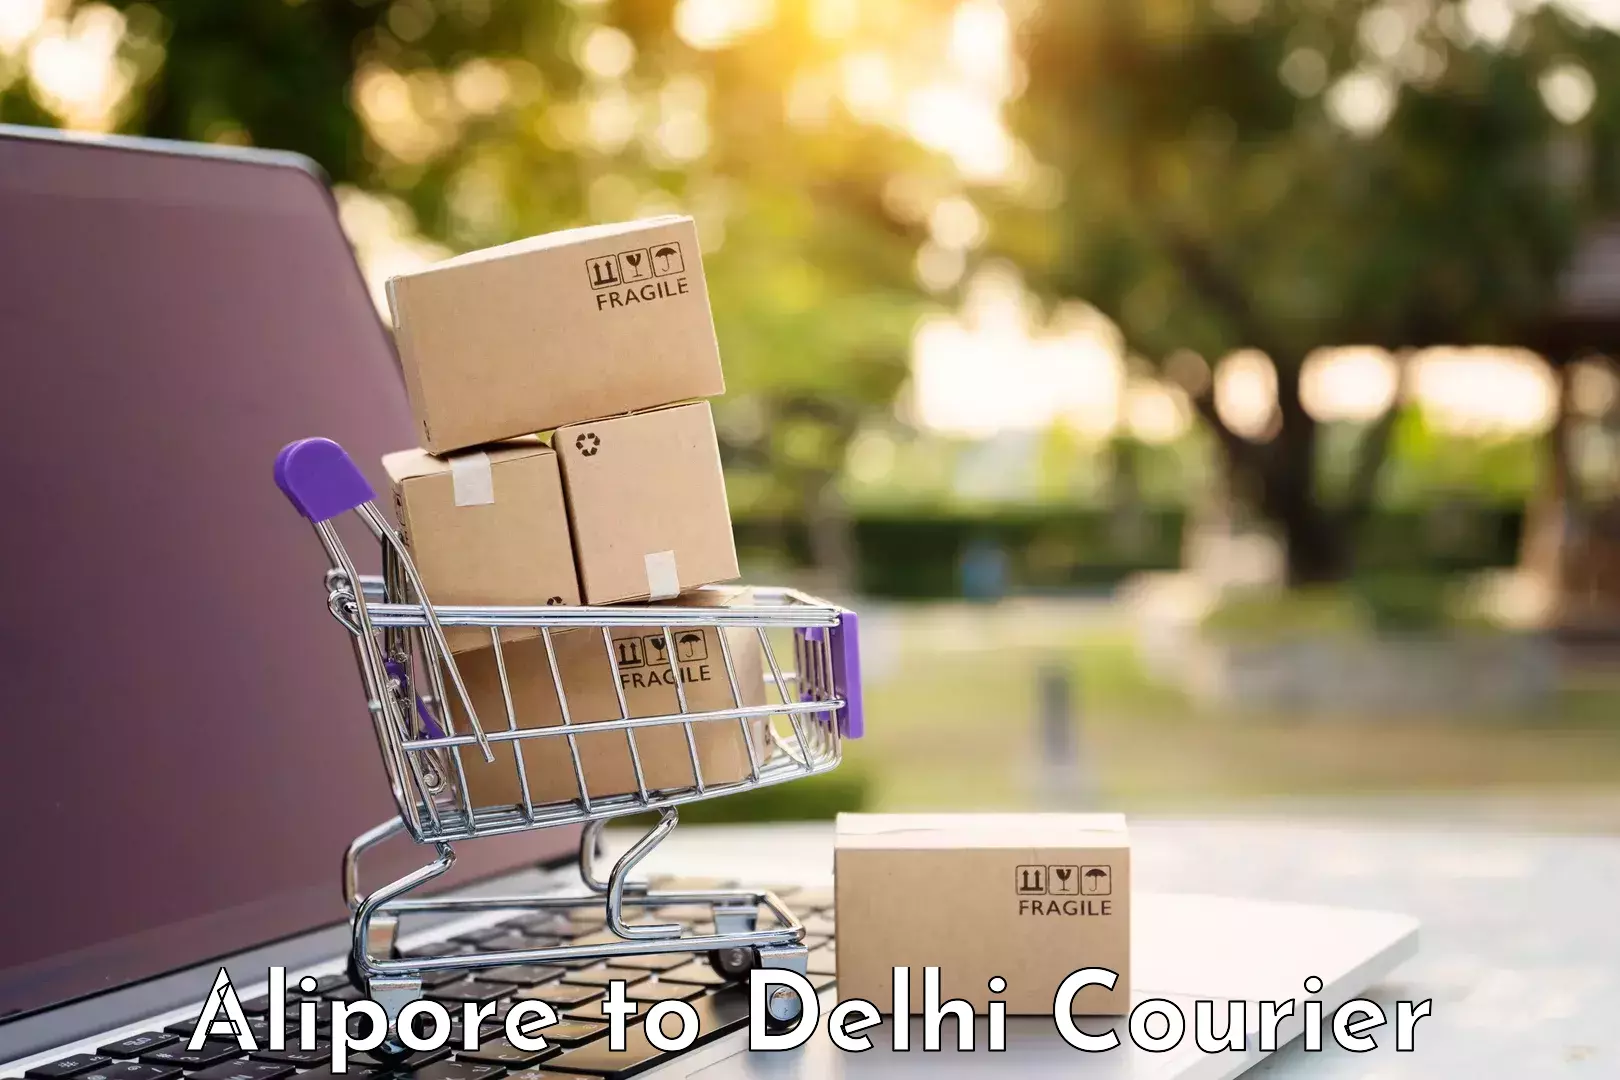 Baggage transport network Alipore to Lodhi Road